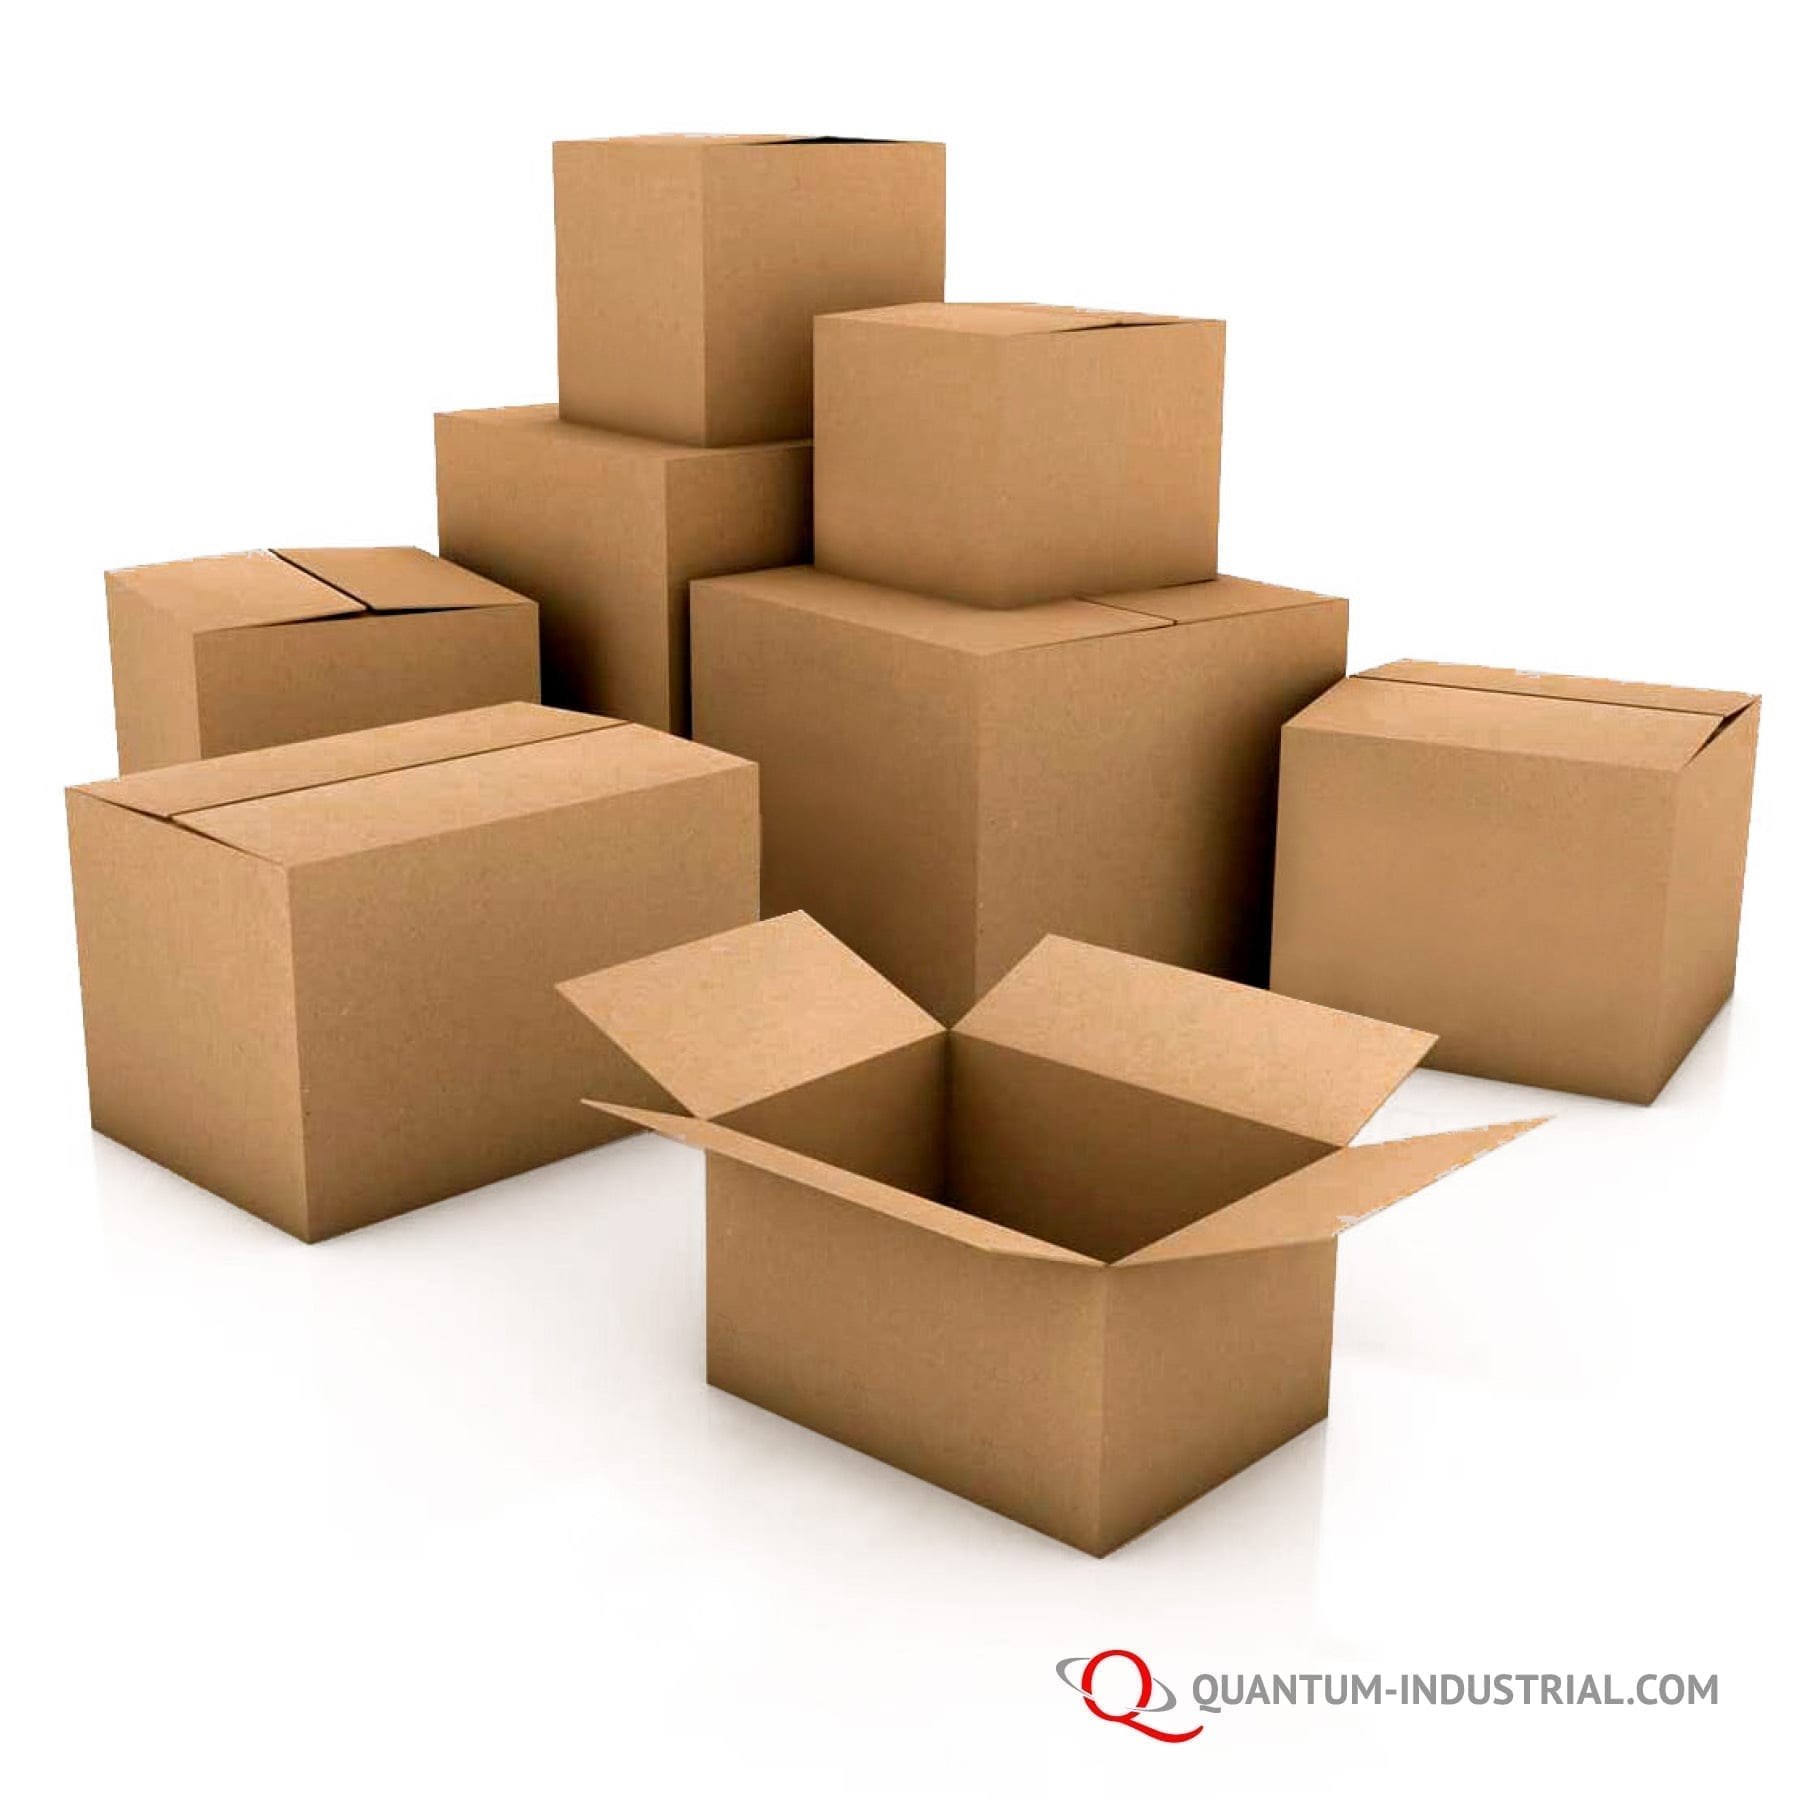 25 14x12x6 Cardboard Shipping Boxes Cartons Packing Moving Mailing Box 